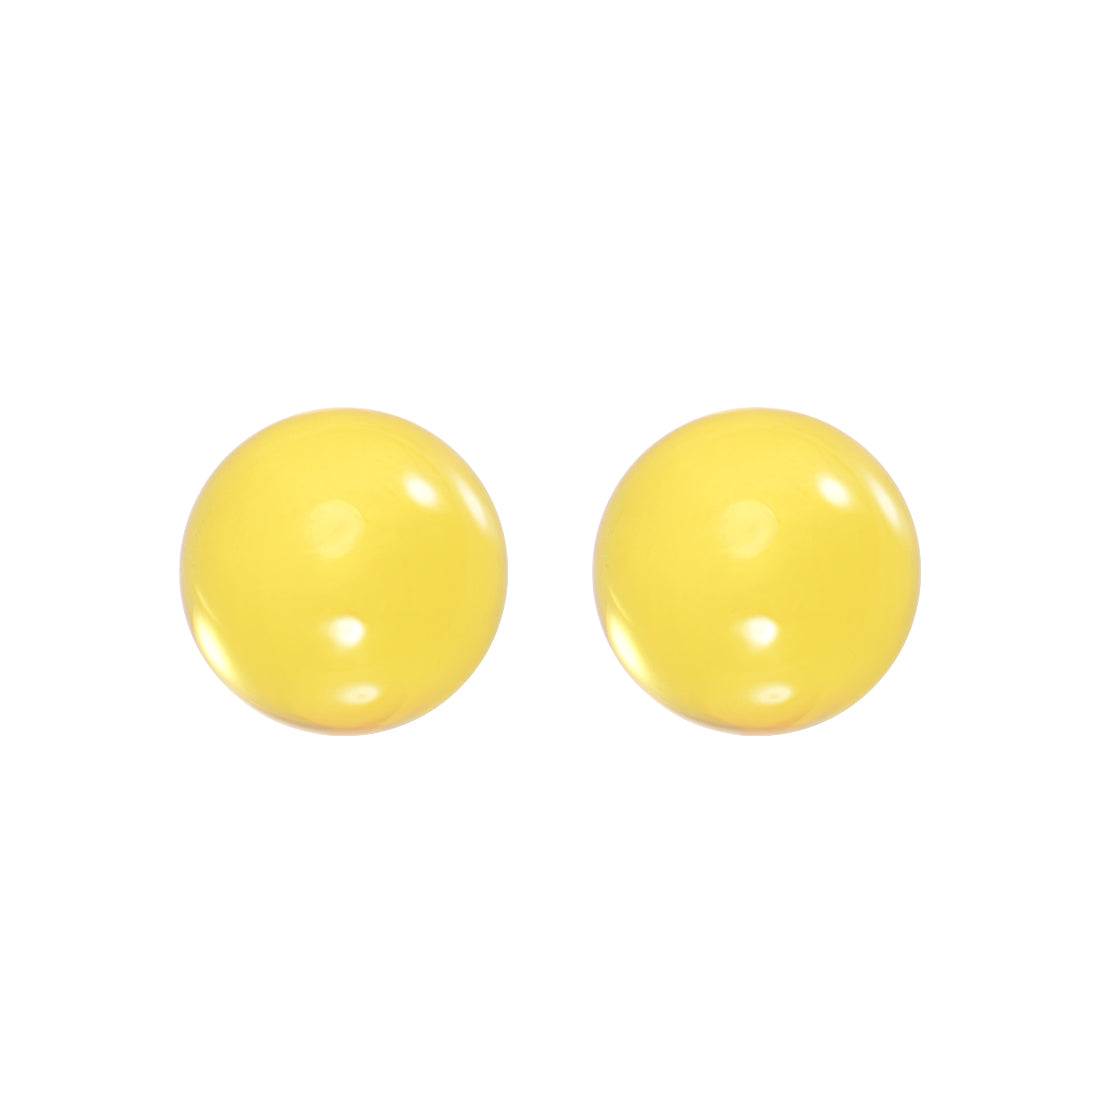 Uxcell Uxcell 30mm Diameter Acrylic Ball Yellow Sphere Ornament 1.2 Inches 2 Pcs